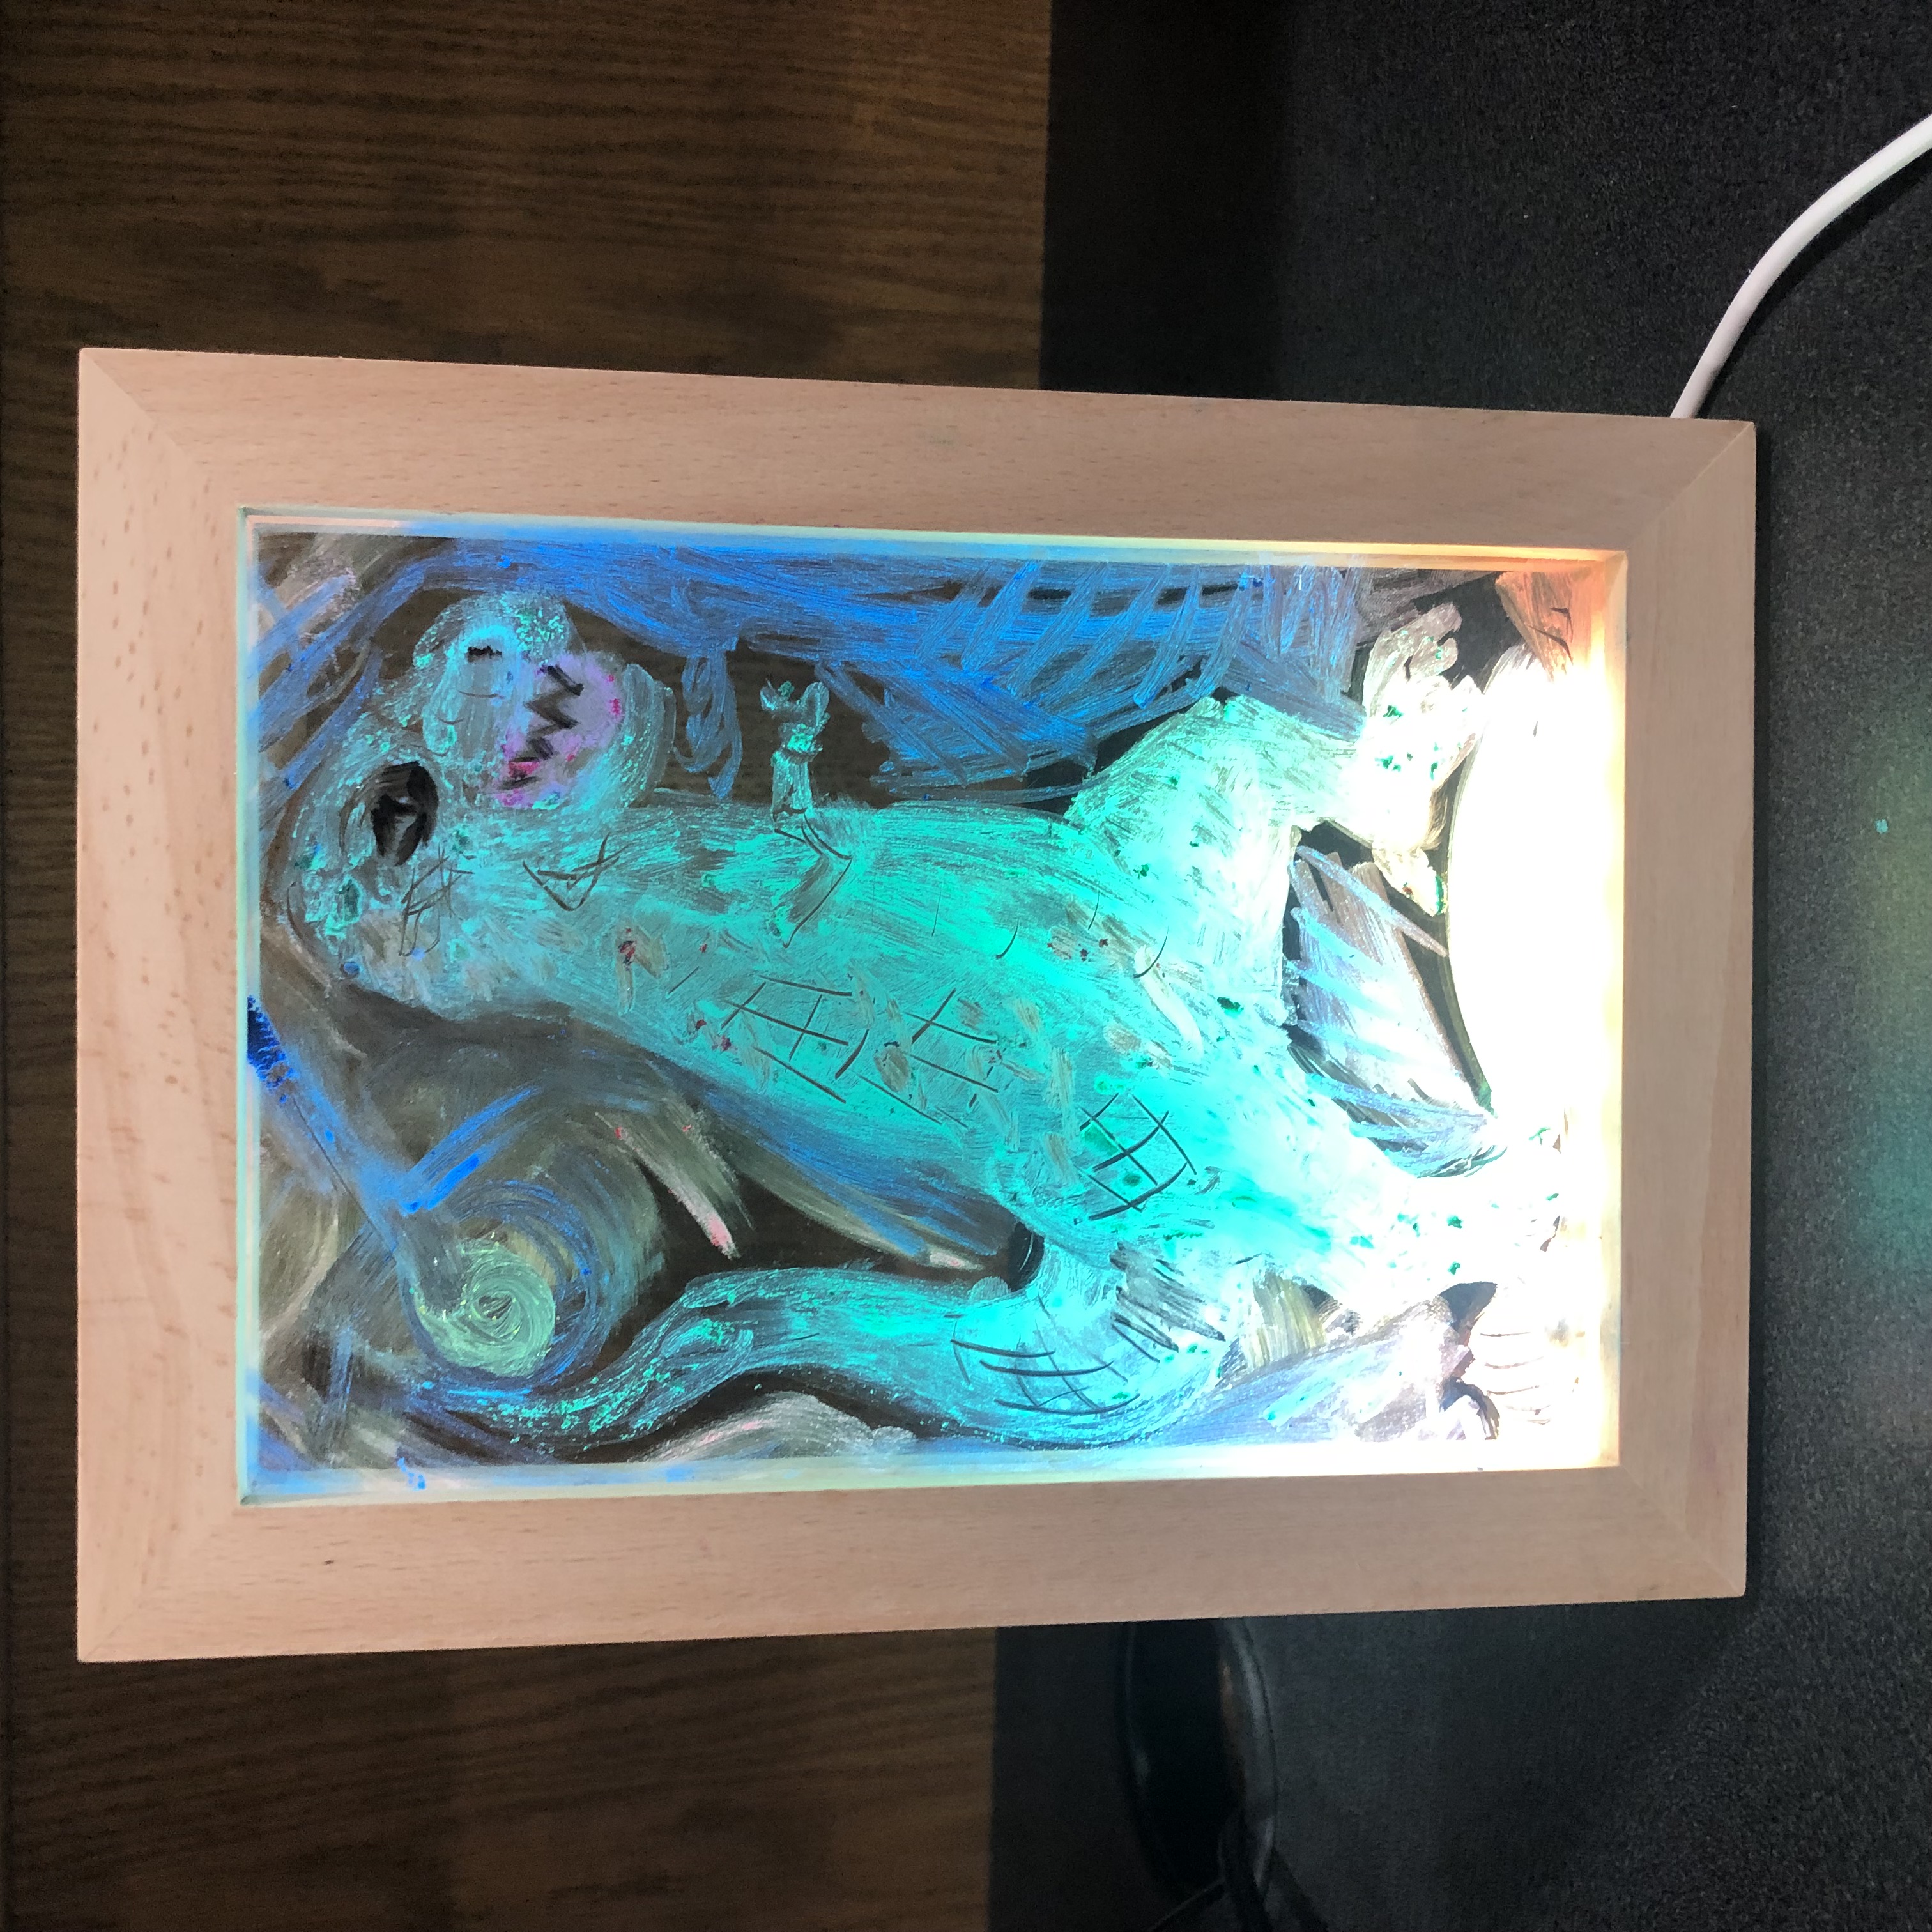 An image of an LED light frame with a drawing of a green T-Rex in the center. There is blue in the background and yellow towards the bottom of the frame, where the light is brightest.